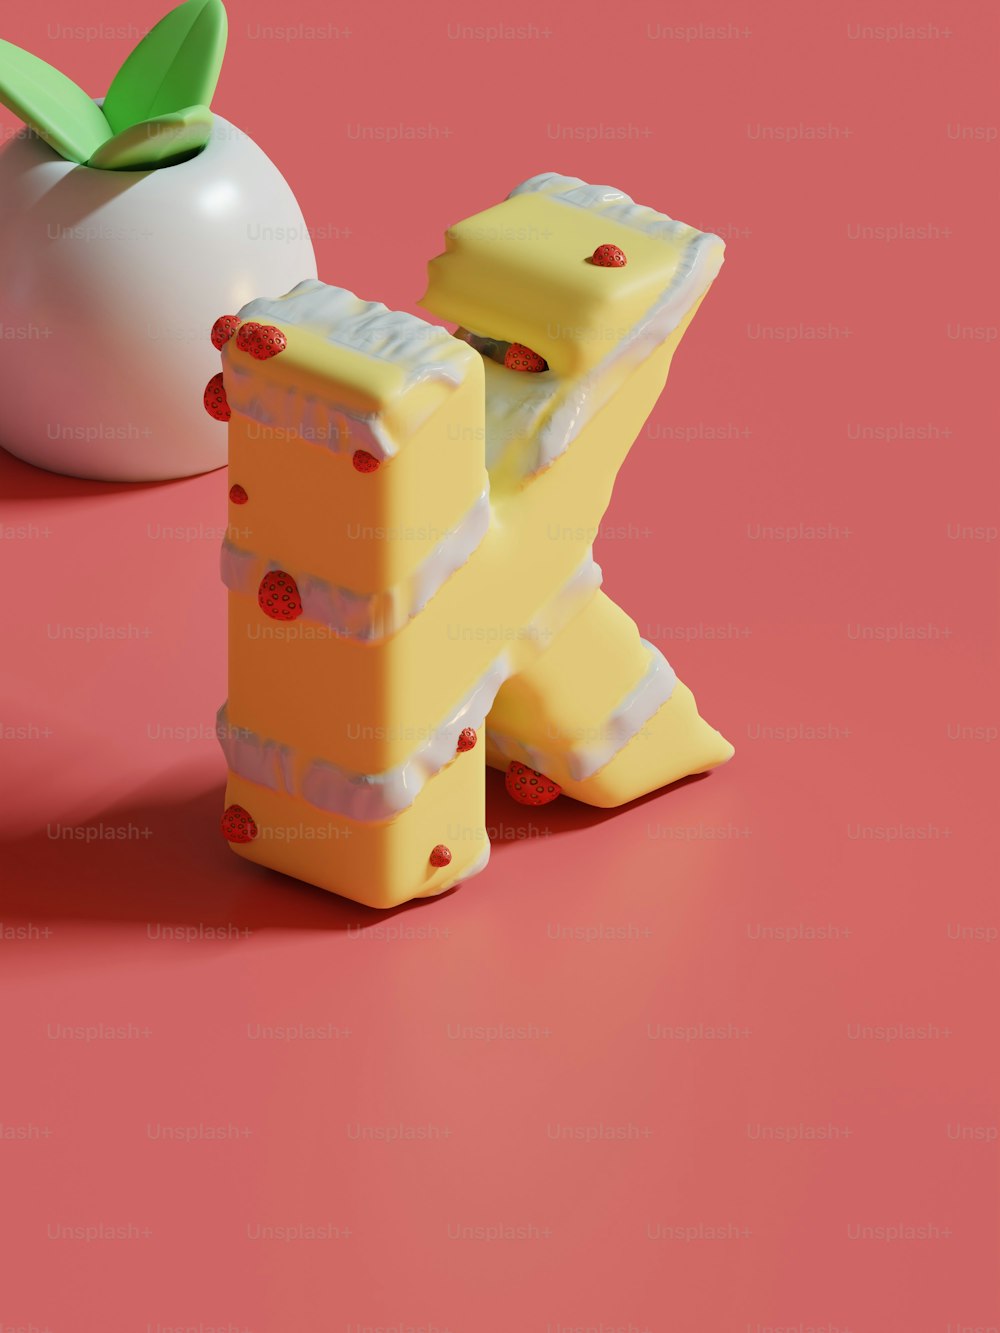 a piece of cheese sitting next to an apple on a pink surface